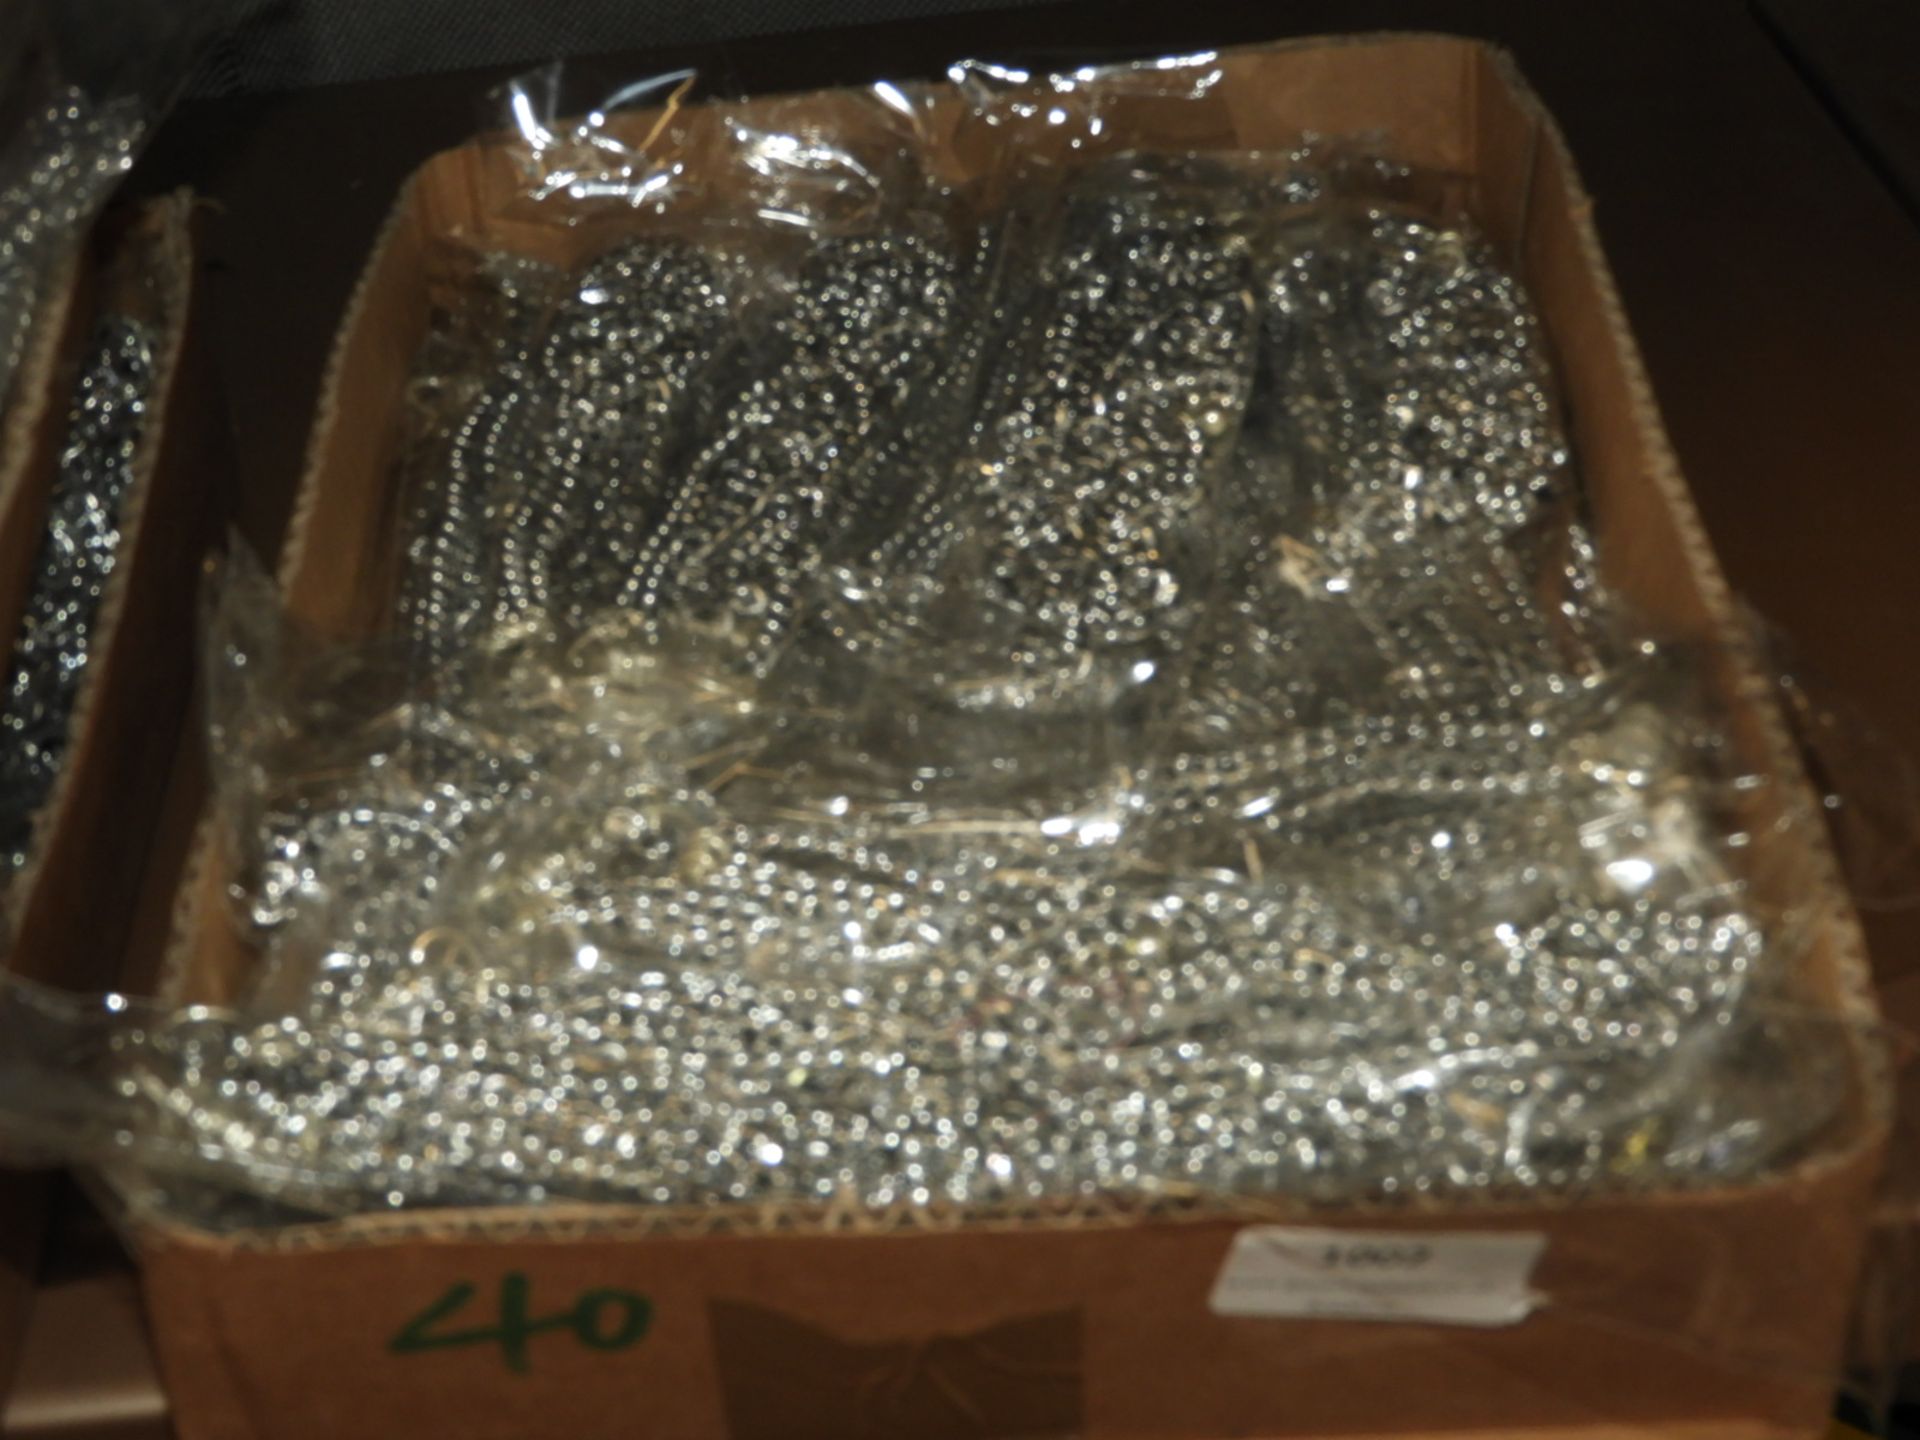 Box Containing 20 Lengths of Chrome Chain